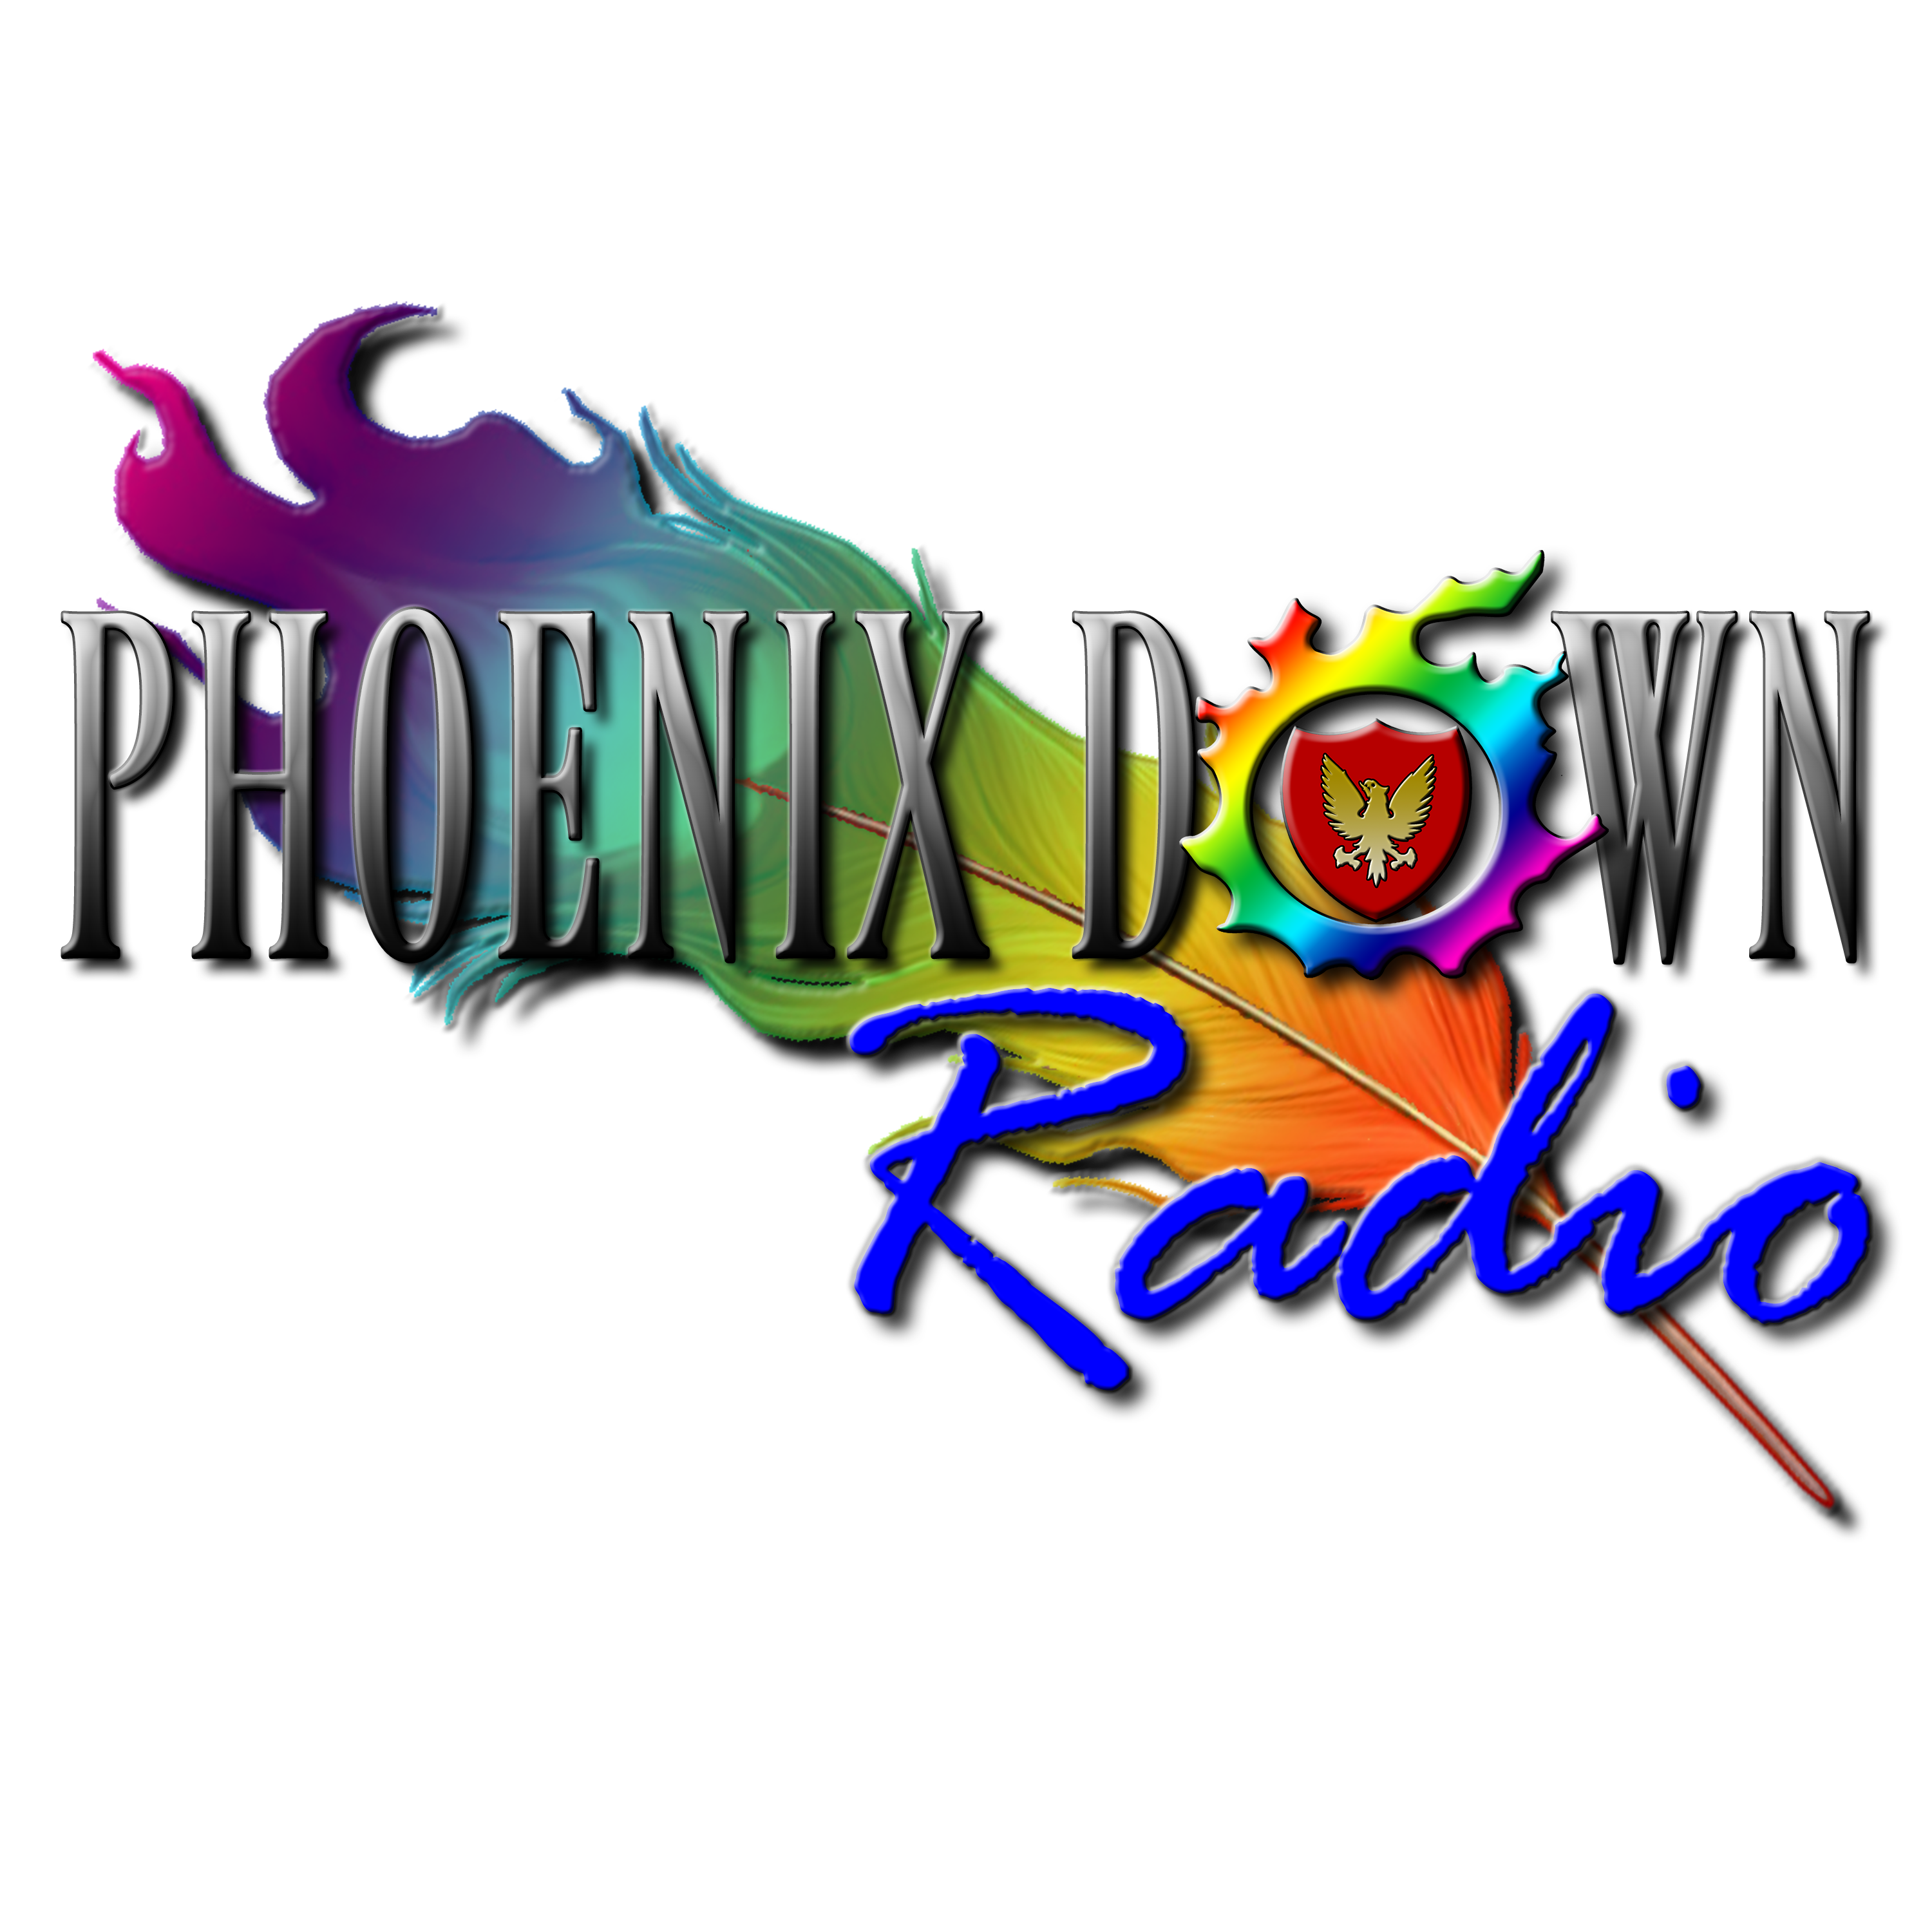 Phoenix Down Radio - Not Just Another Final Fantasy Podcast!